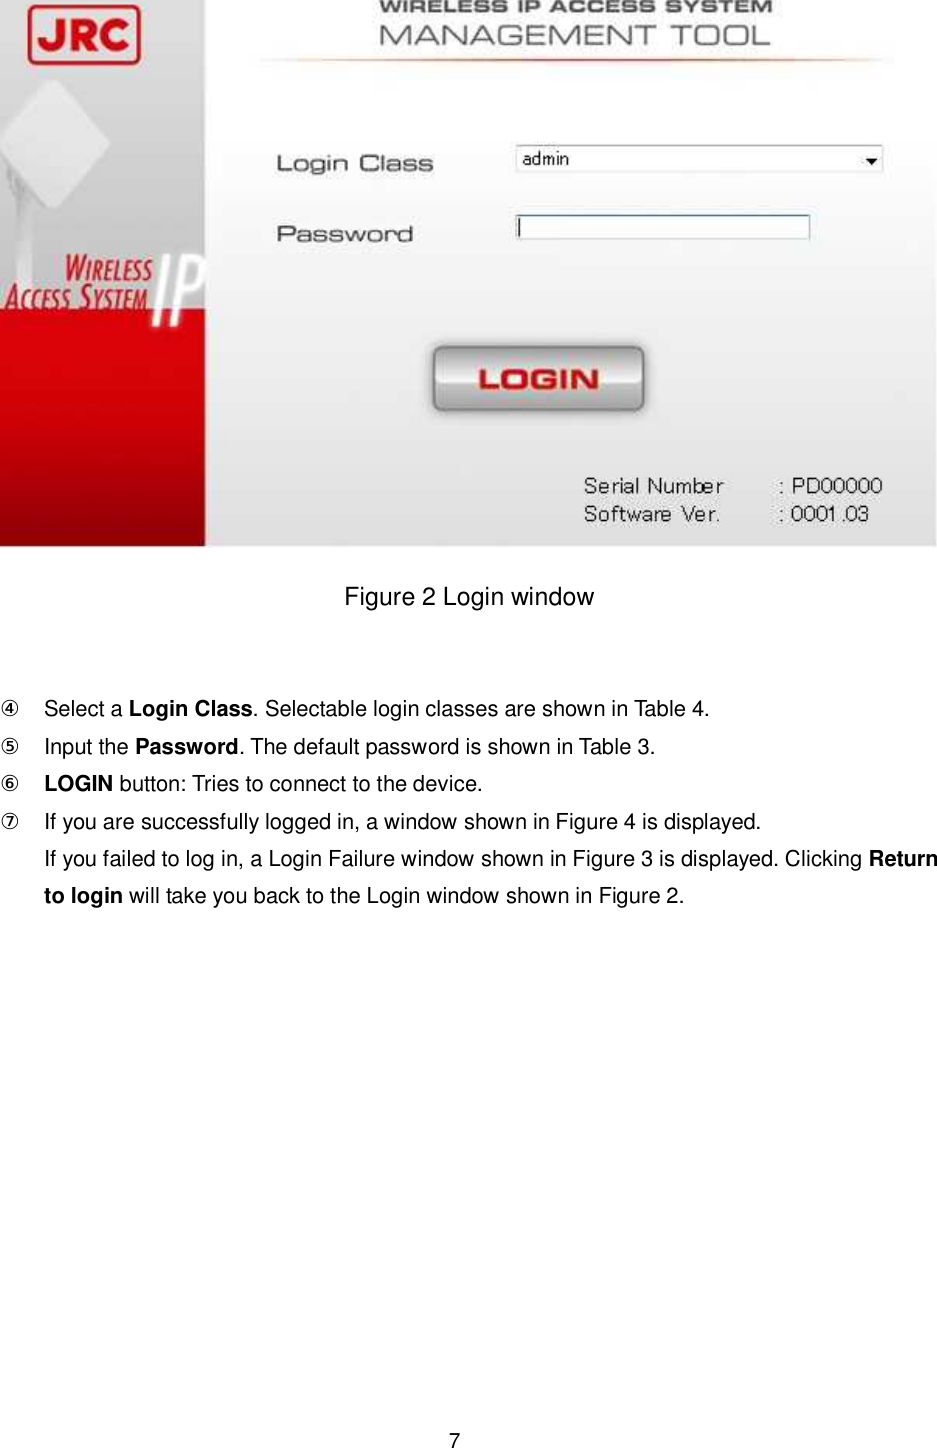    7   Figure 2 Login window   ④ Select a Login Class. Selectable login classes are shown in Table 4. ⑤ Input the Password. The default password is shown in Table 3. ⑥ LOGIN button: Tries to connect to the device. ⑦ If you are successfully logged in, a window shown in Figure 4 is displayed. If you failed to log in, a Login Failure window shown in Figure 3 is displayed. Clicking Return to login will take you back to the Login window shown in Figure 2.    